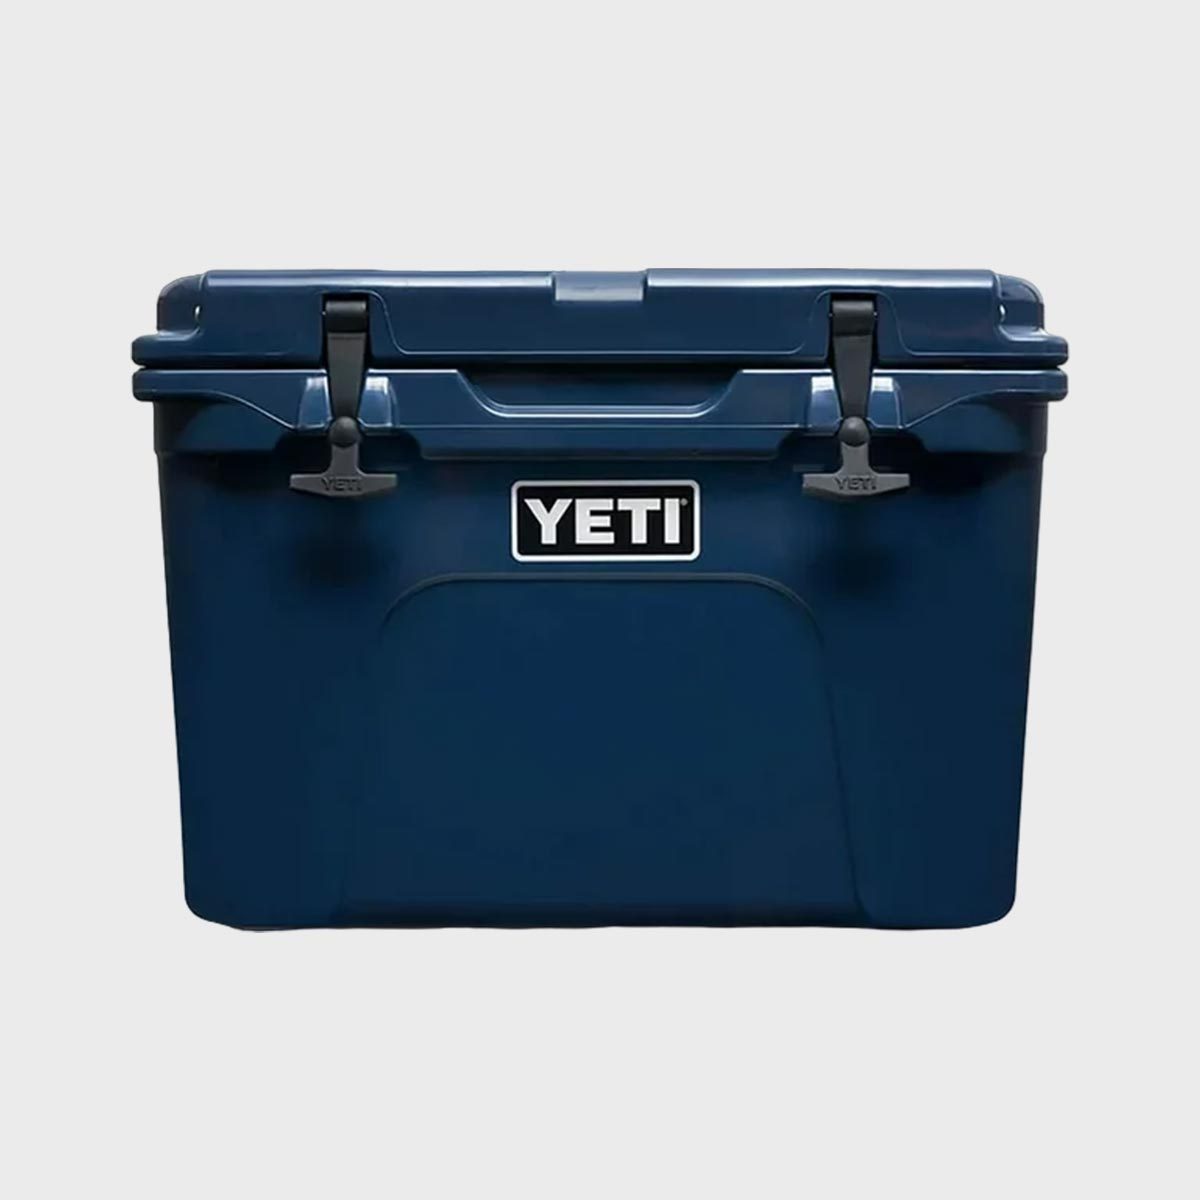 Yeti 20 Cans Hard Sided Cooler